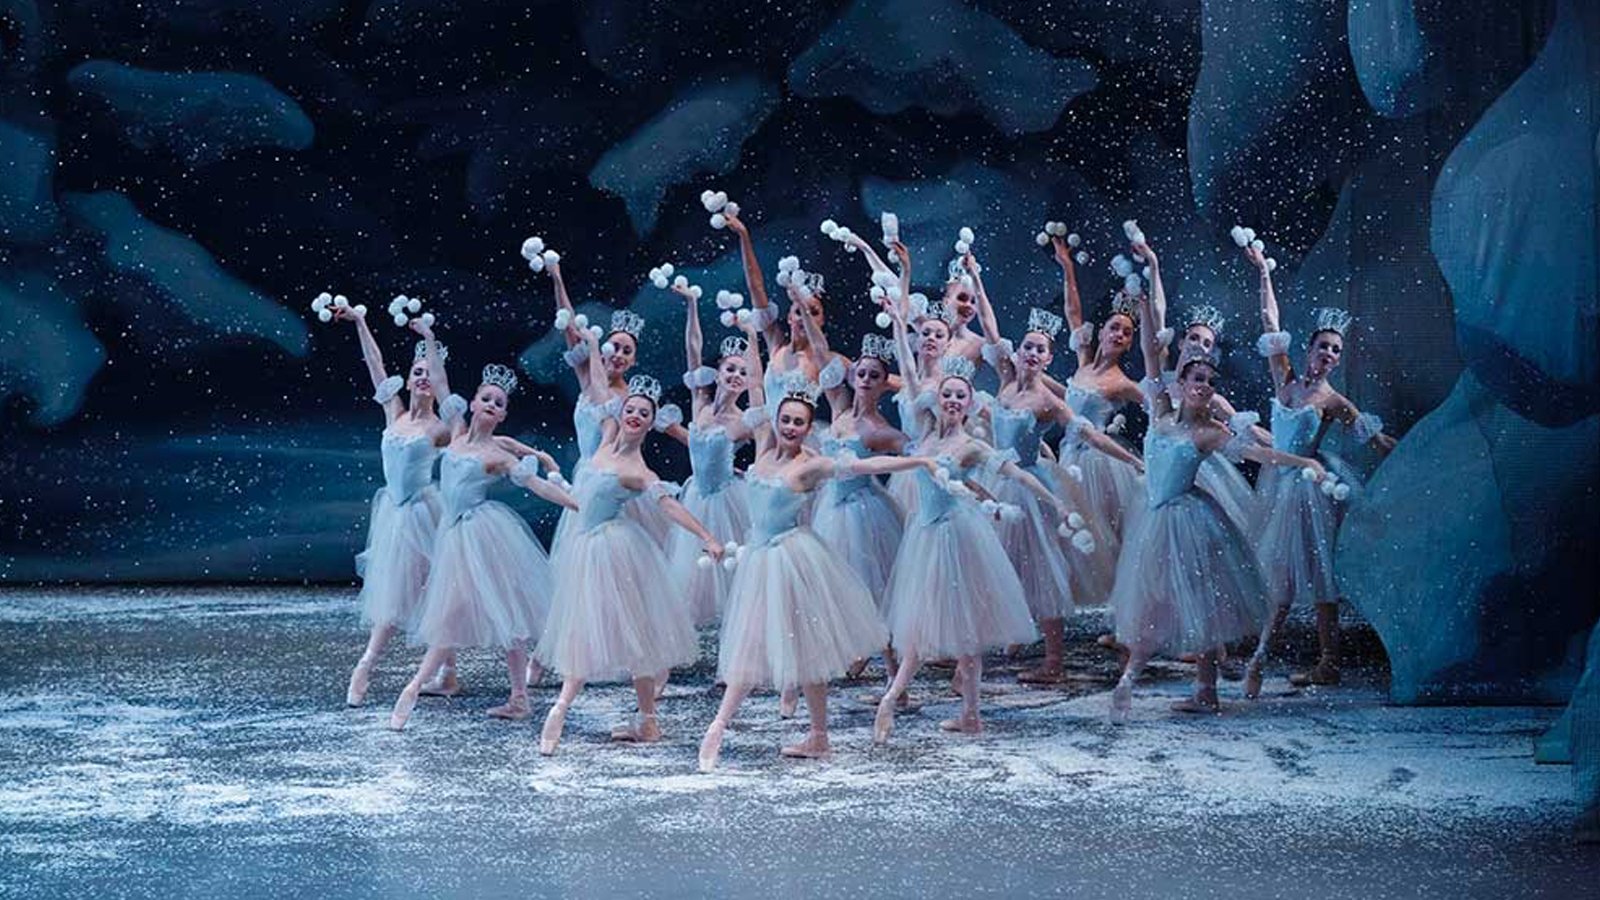 Sixteen ballerinas clustered on a snowy stage with a winter backdrop, wearing light bluish-white tutus hold clusters of white balls, raising arms upwards. 